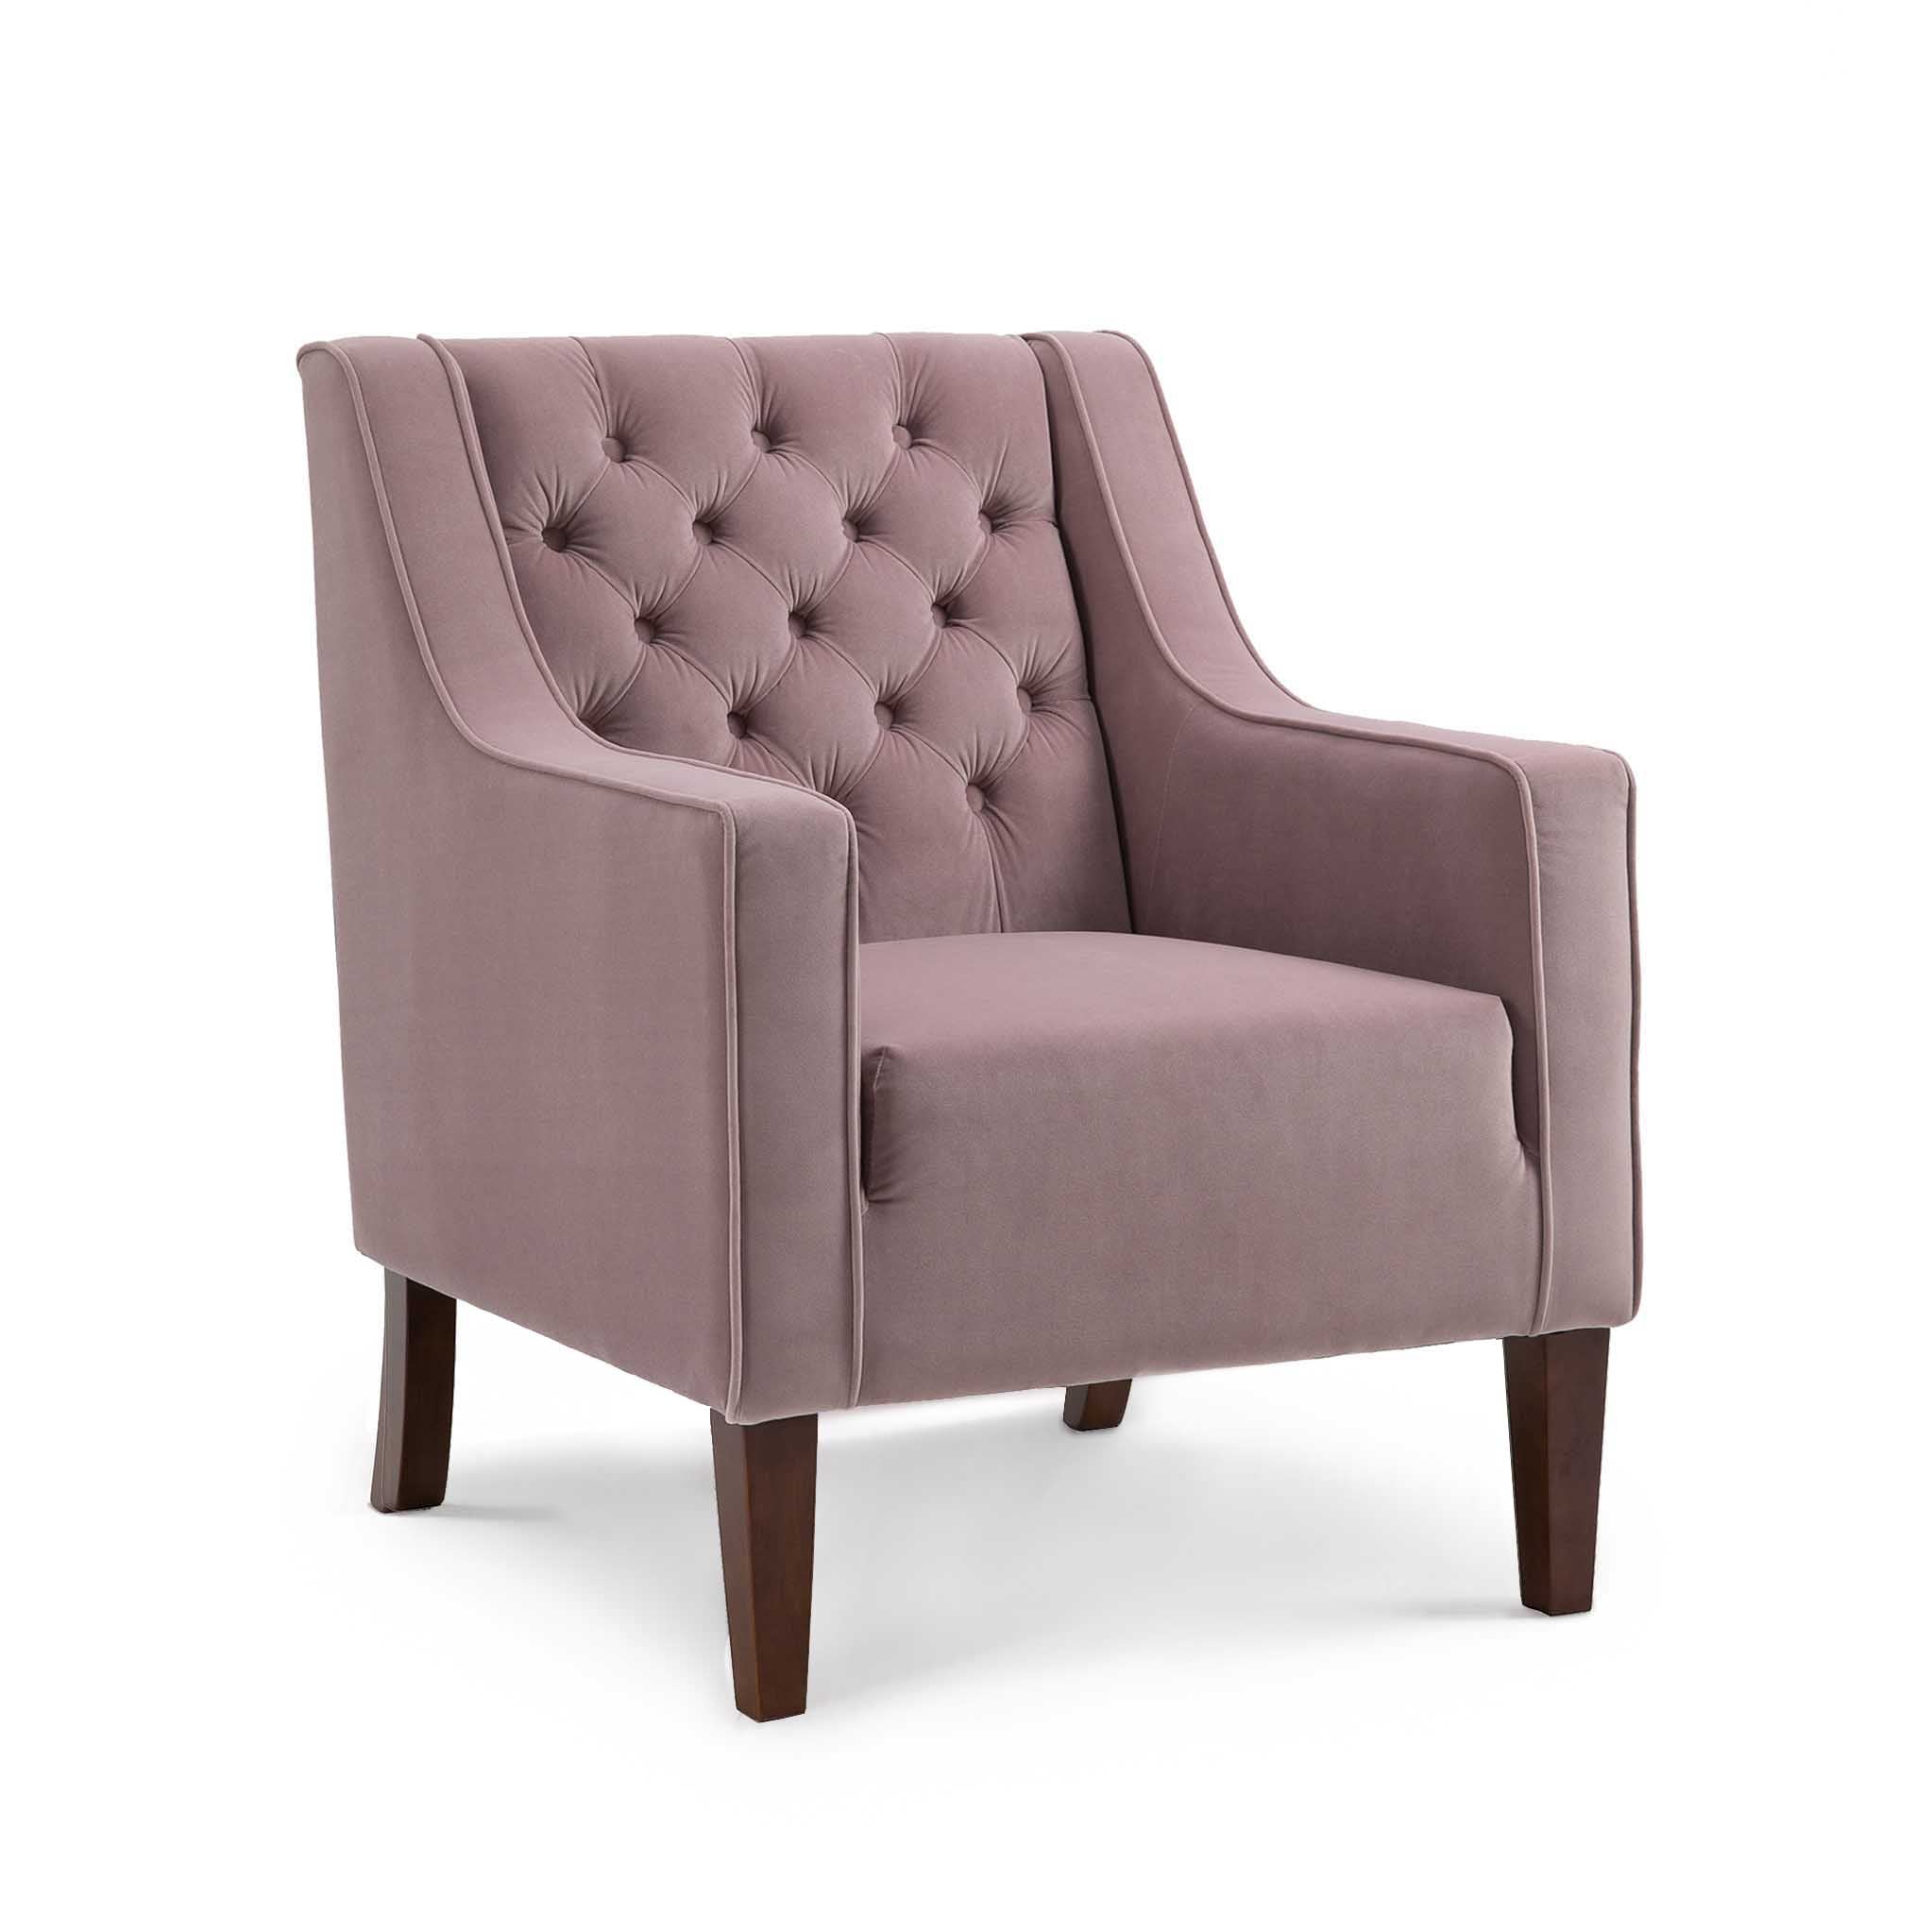 Eliza Velvet Fabric Accent Armchair Comfy Occasional Upholstered Chesterfield Statement Vanity Chairs For Living Room Or Bedroom